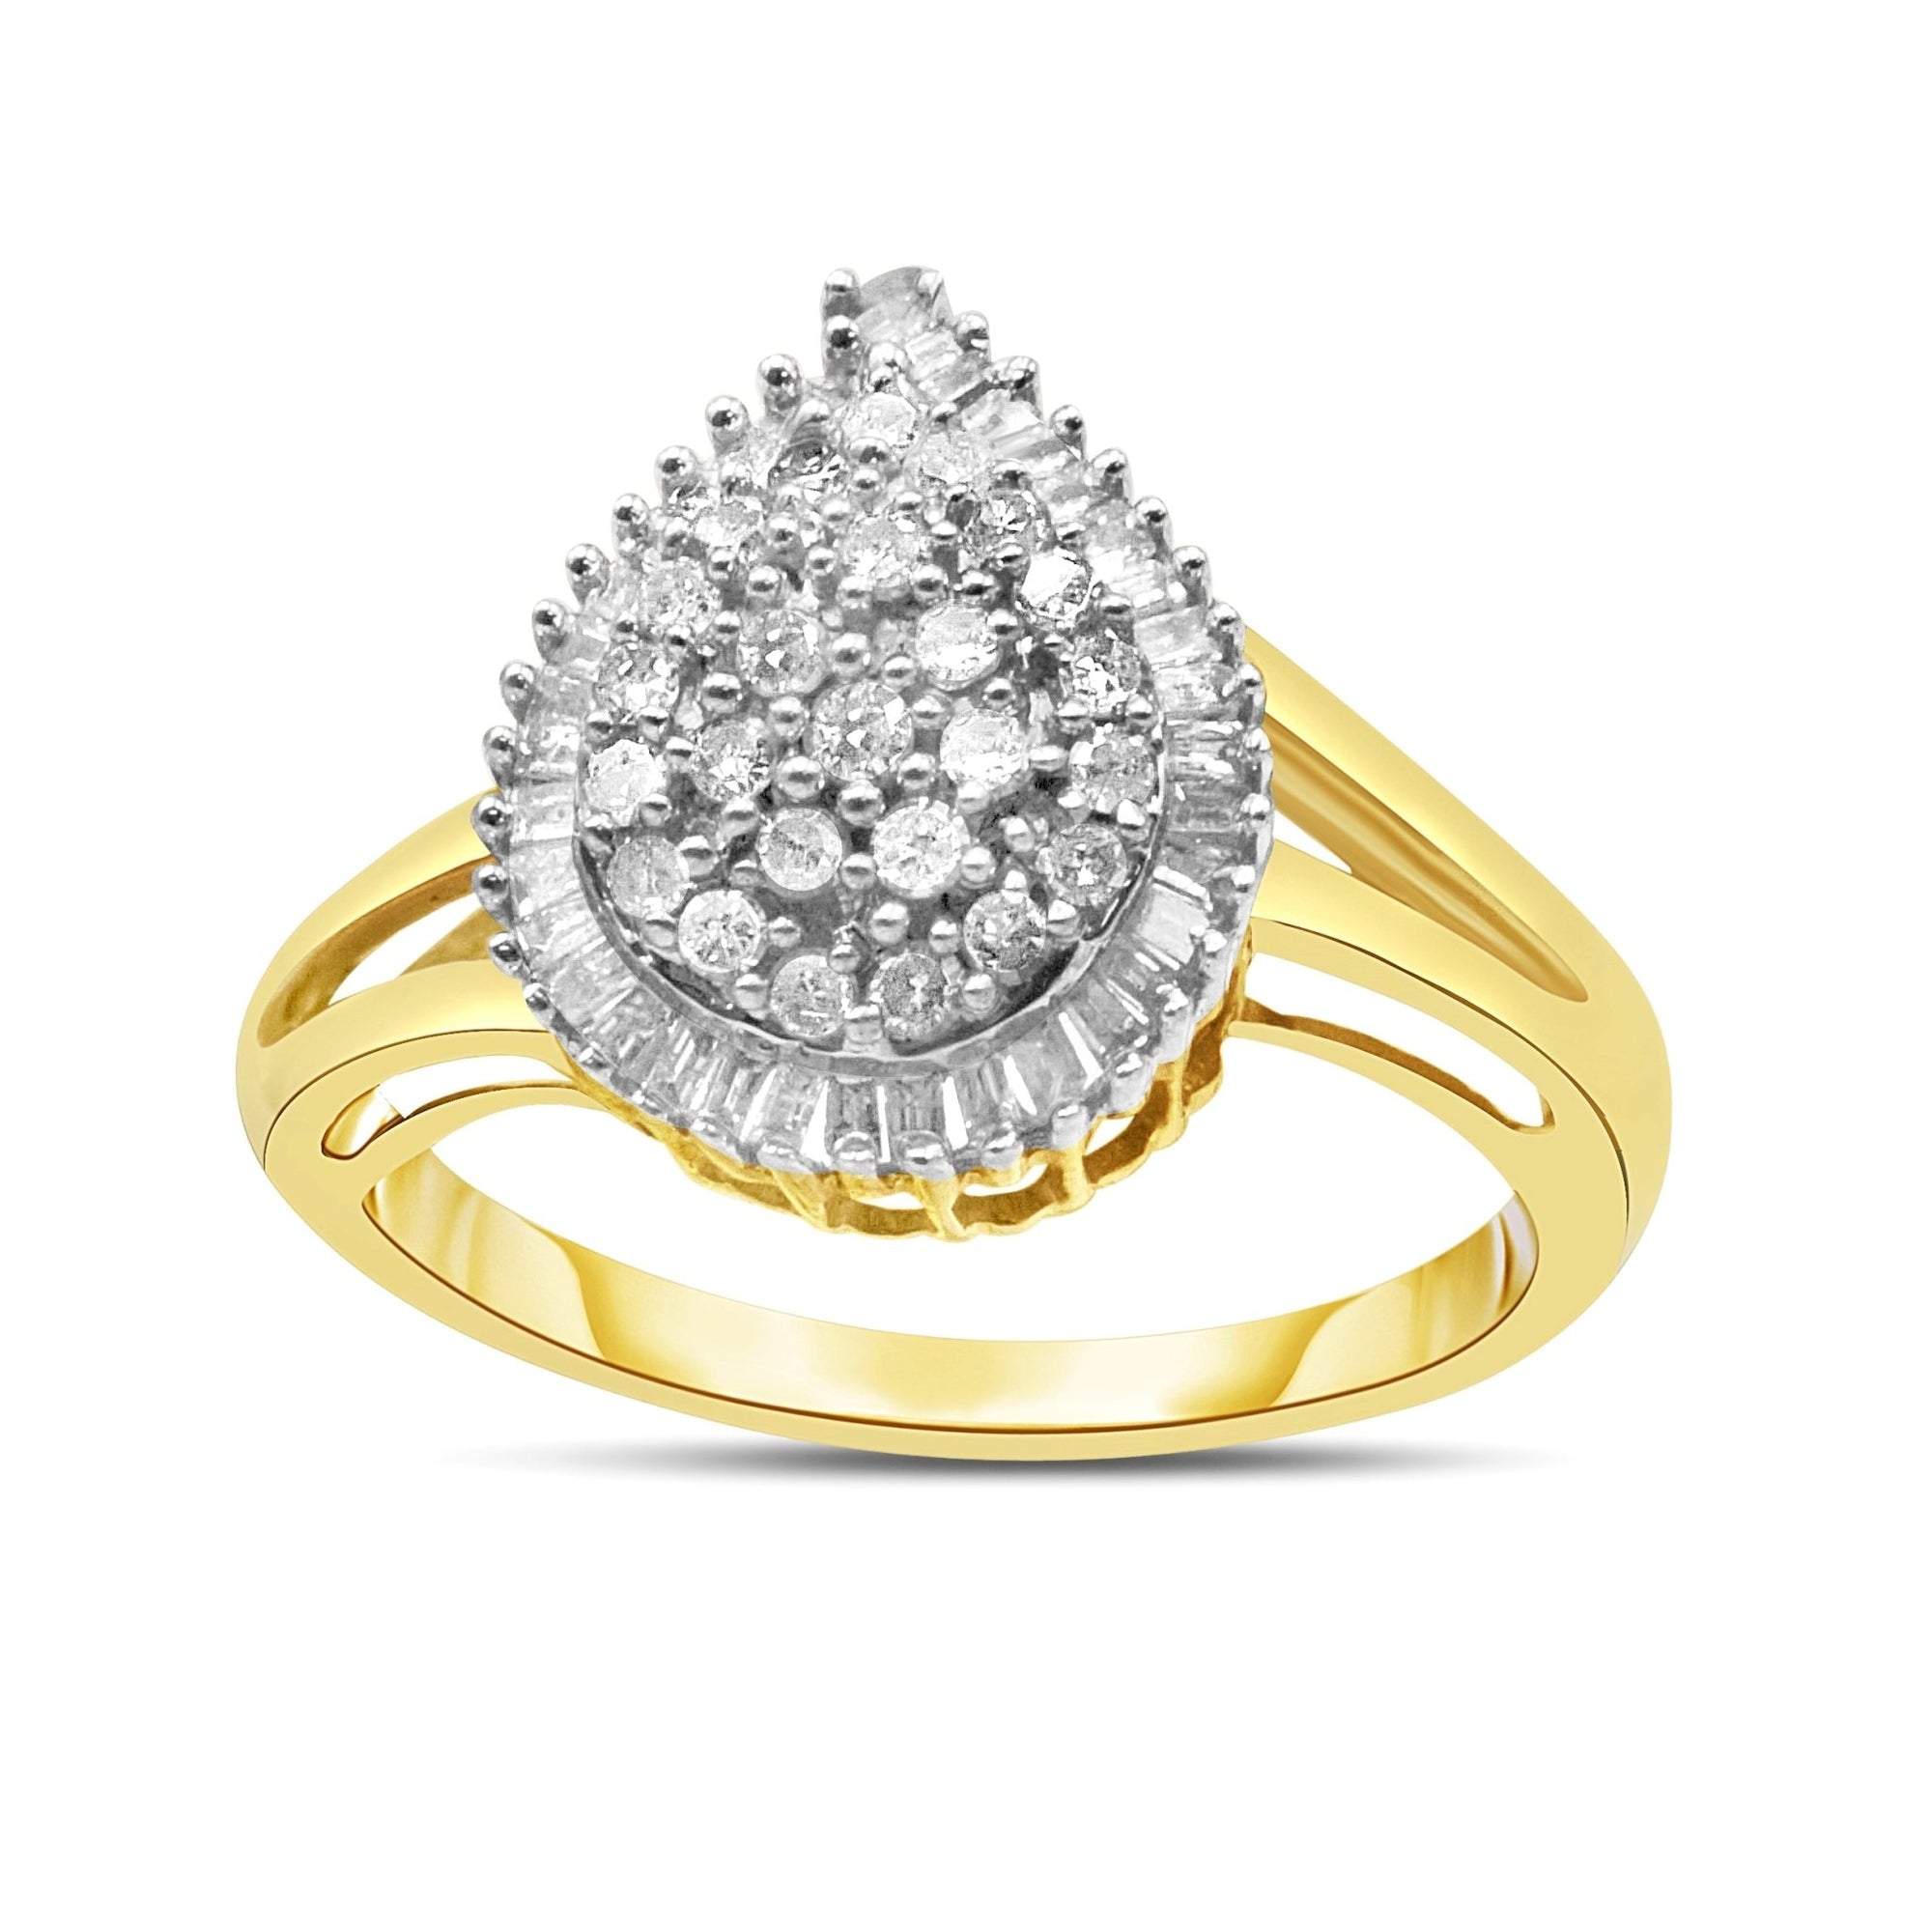 10K Yellow Gold 1/2 Cttw Round and Baguette-Cut Diamond Pear Ring (I-J Color, I1-I2 Clarity) - Size 7 - LinkagejewelrydesignLinkagejewelrydesign